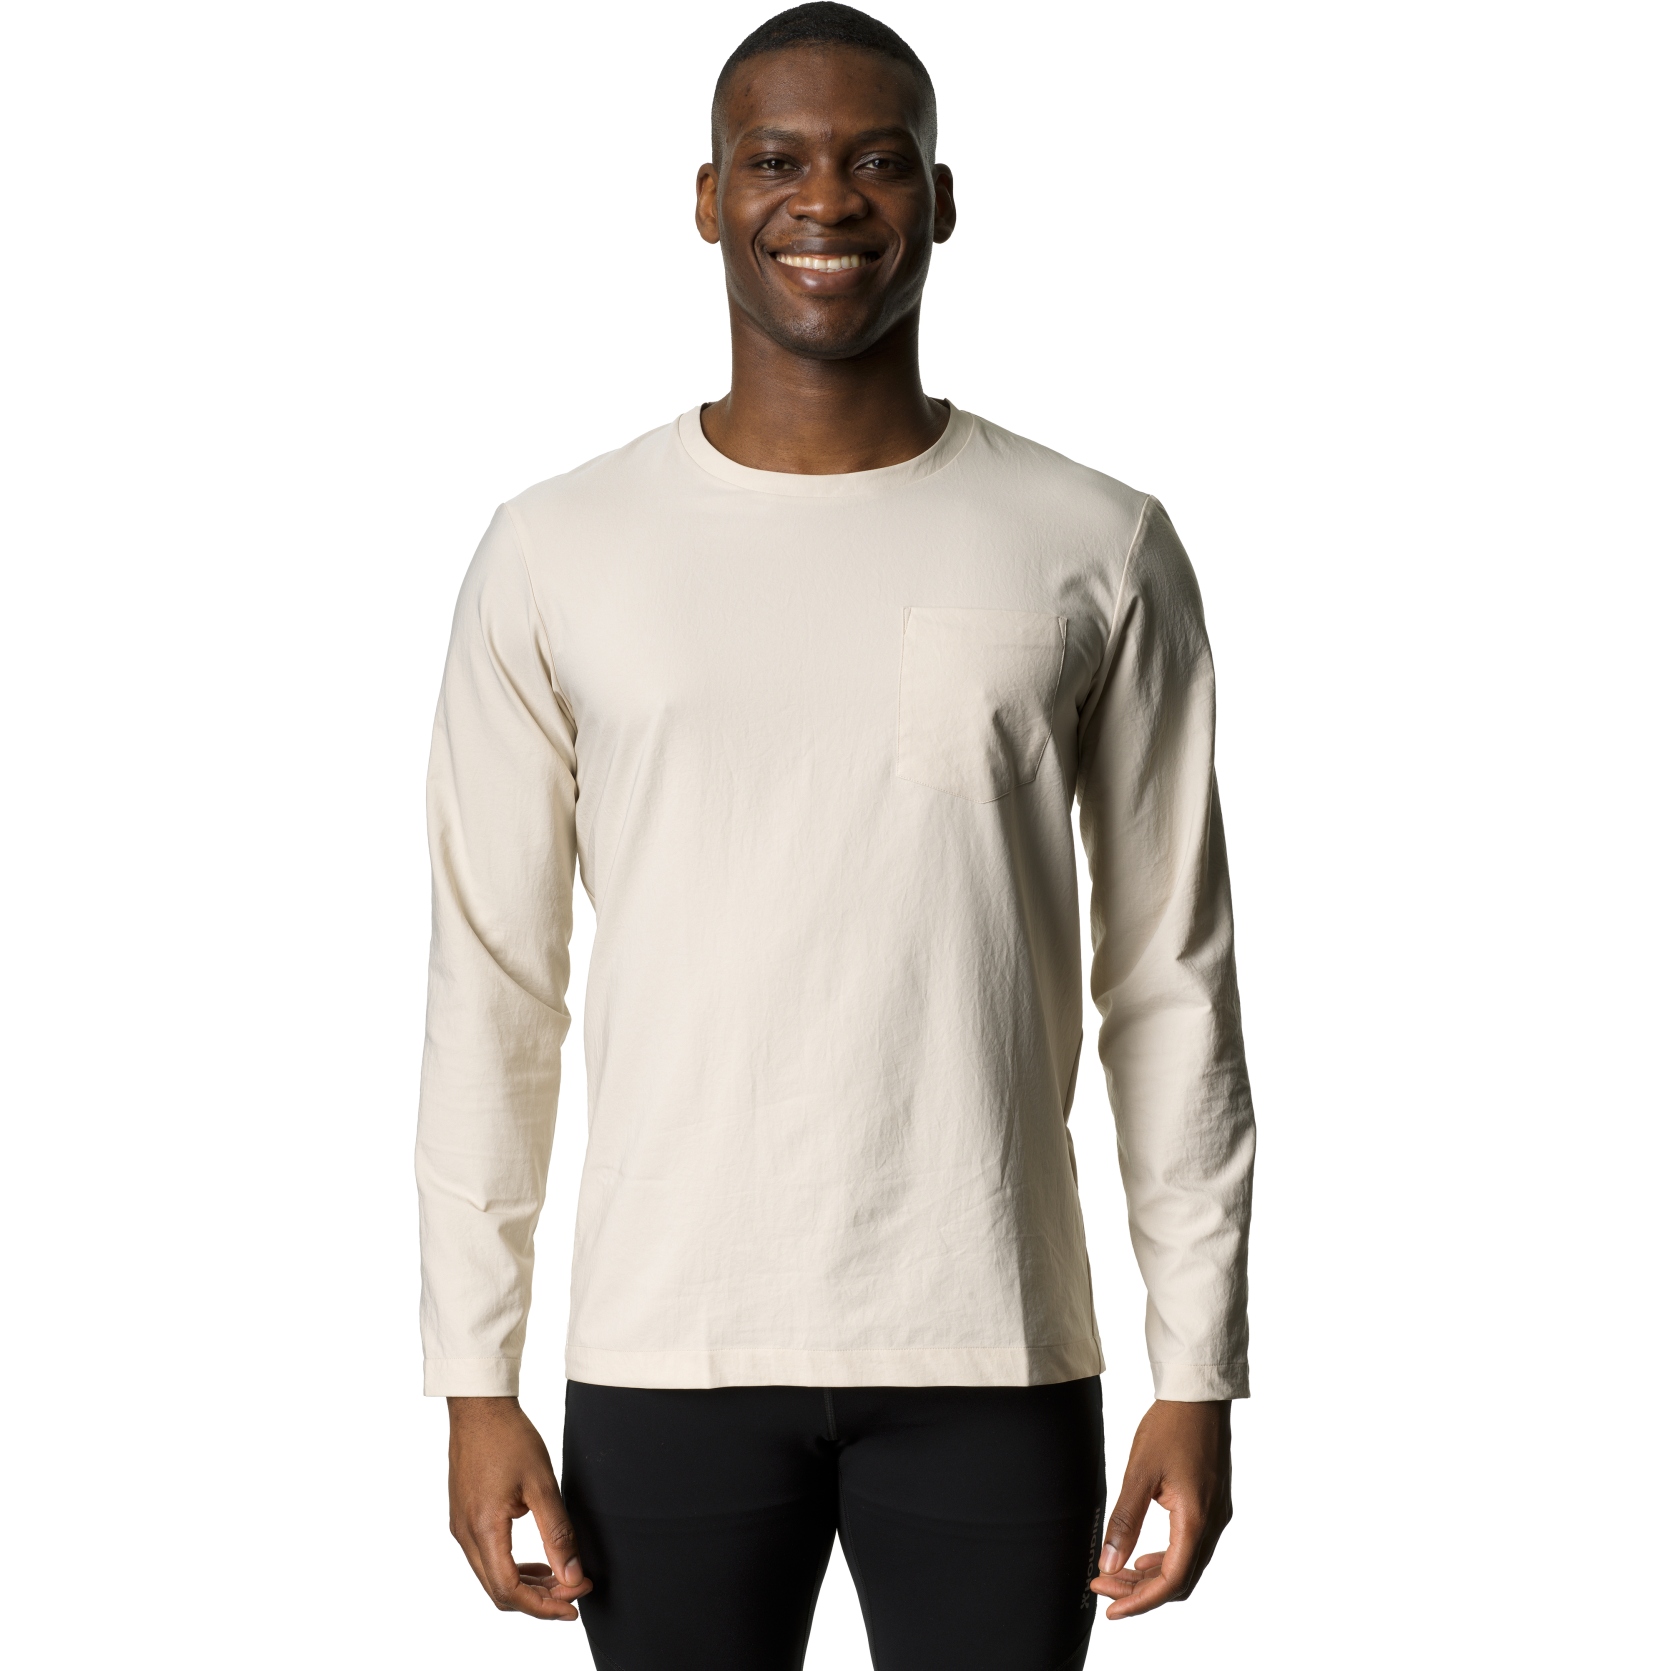 Picture of Houdini Cover Crew Long Sleeve Shirt Men - Foggy Mountain